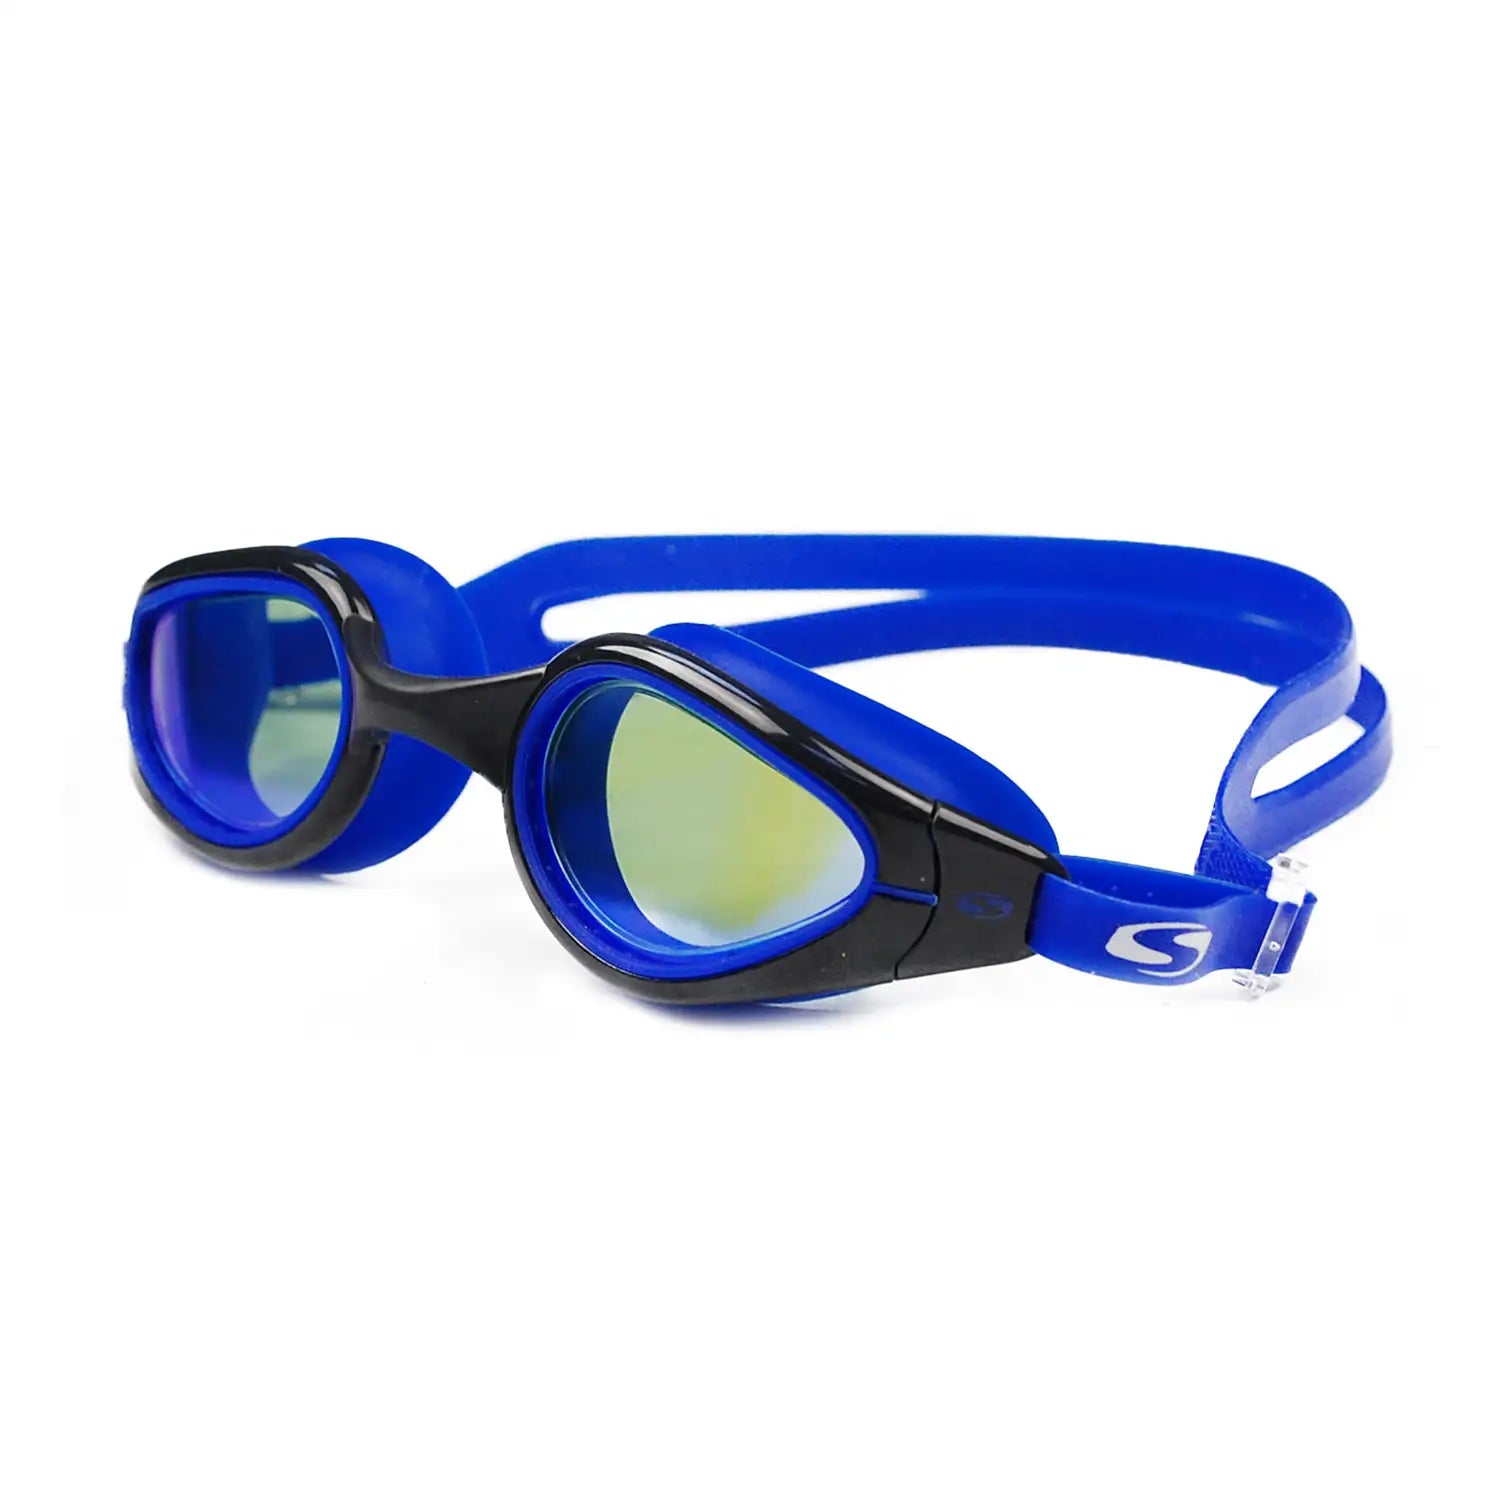 Sola Open water Swimming Goggles - Worthing Watersports - A1733-ONE-01 - Sola